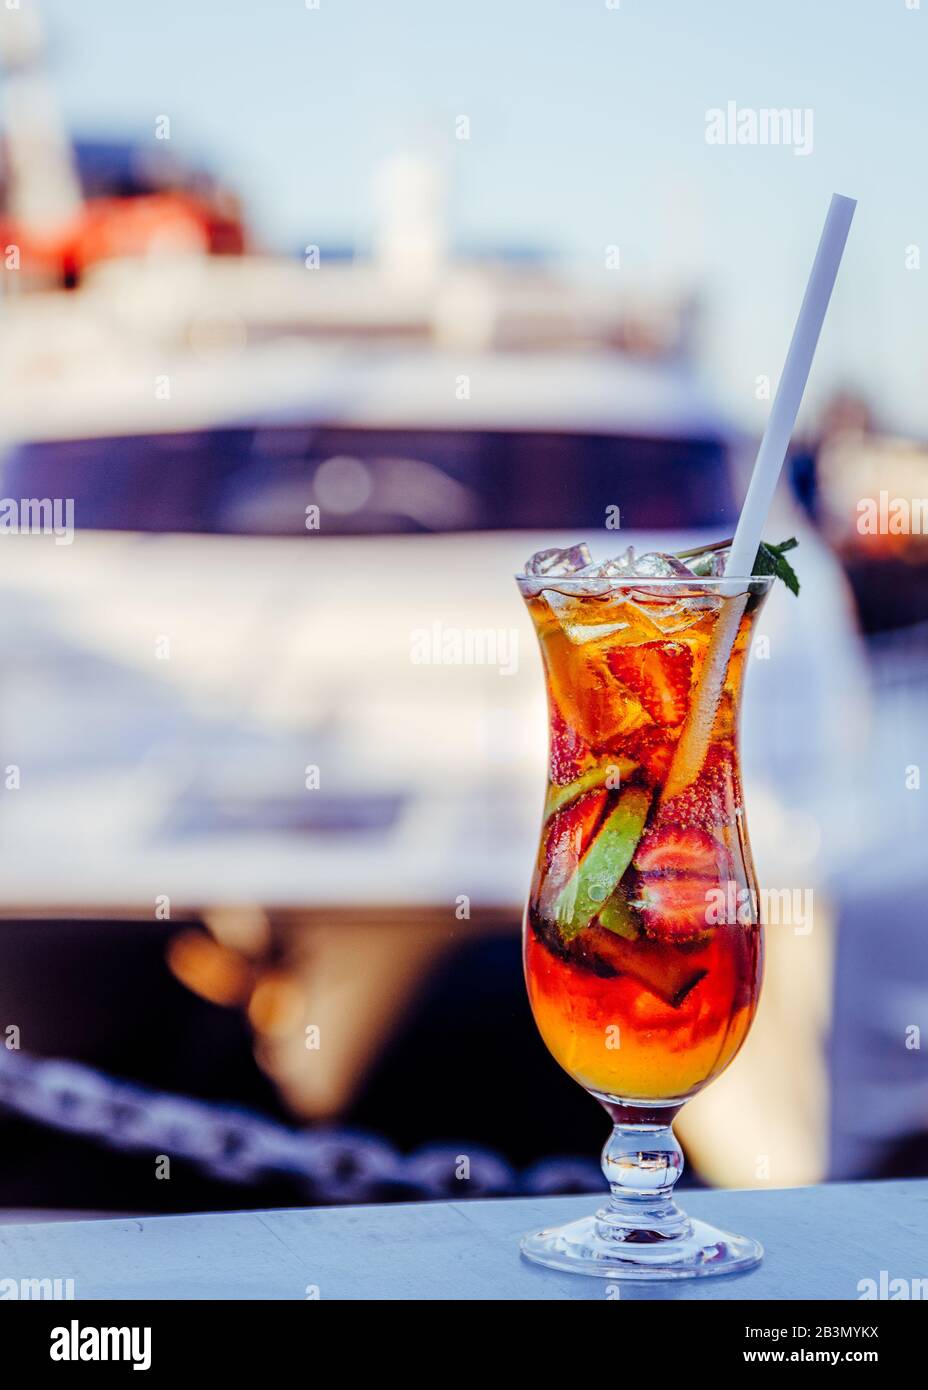 Close up of refreshing cocktail drink with juicy red looking lips inside glass with boat in background.Cape Town SA Stock Photo